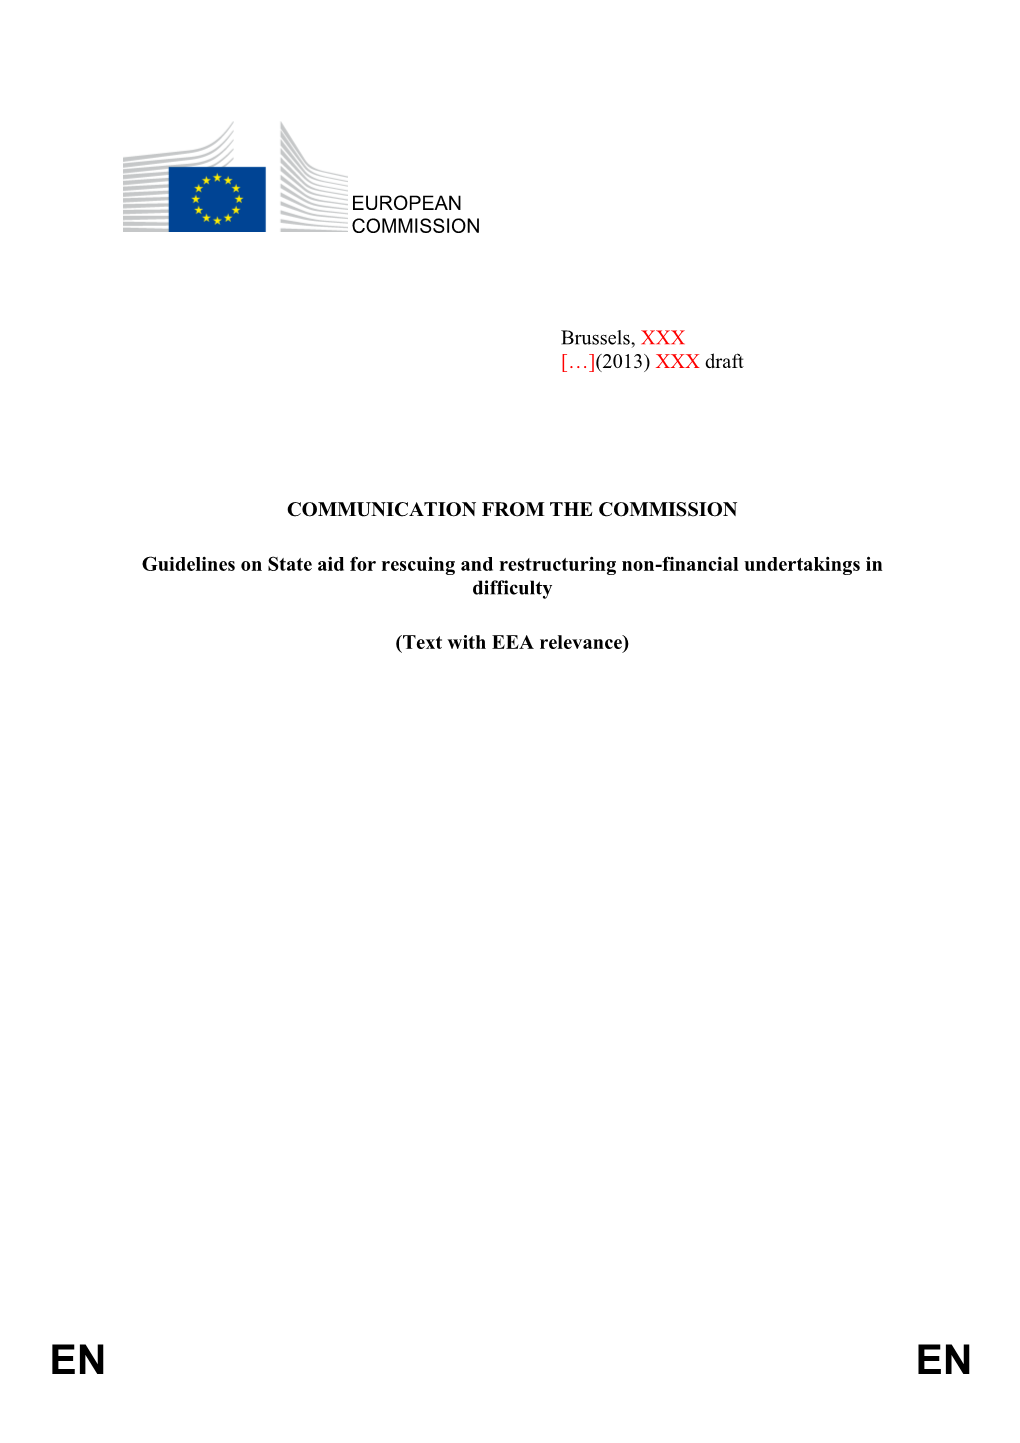 Communication from the Commission